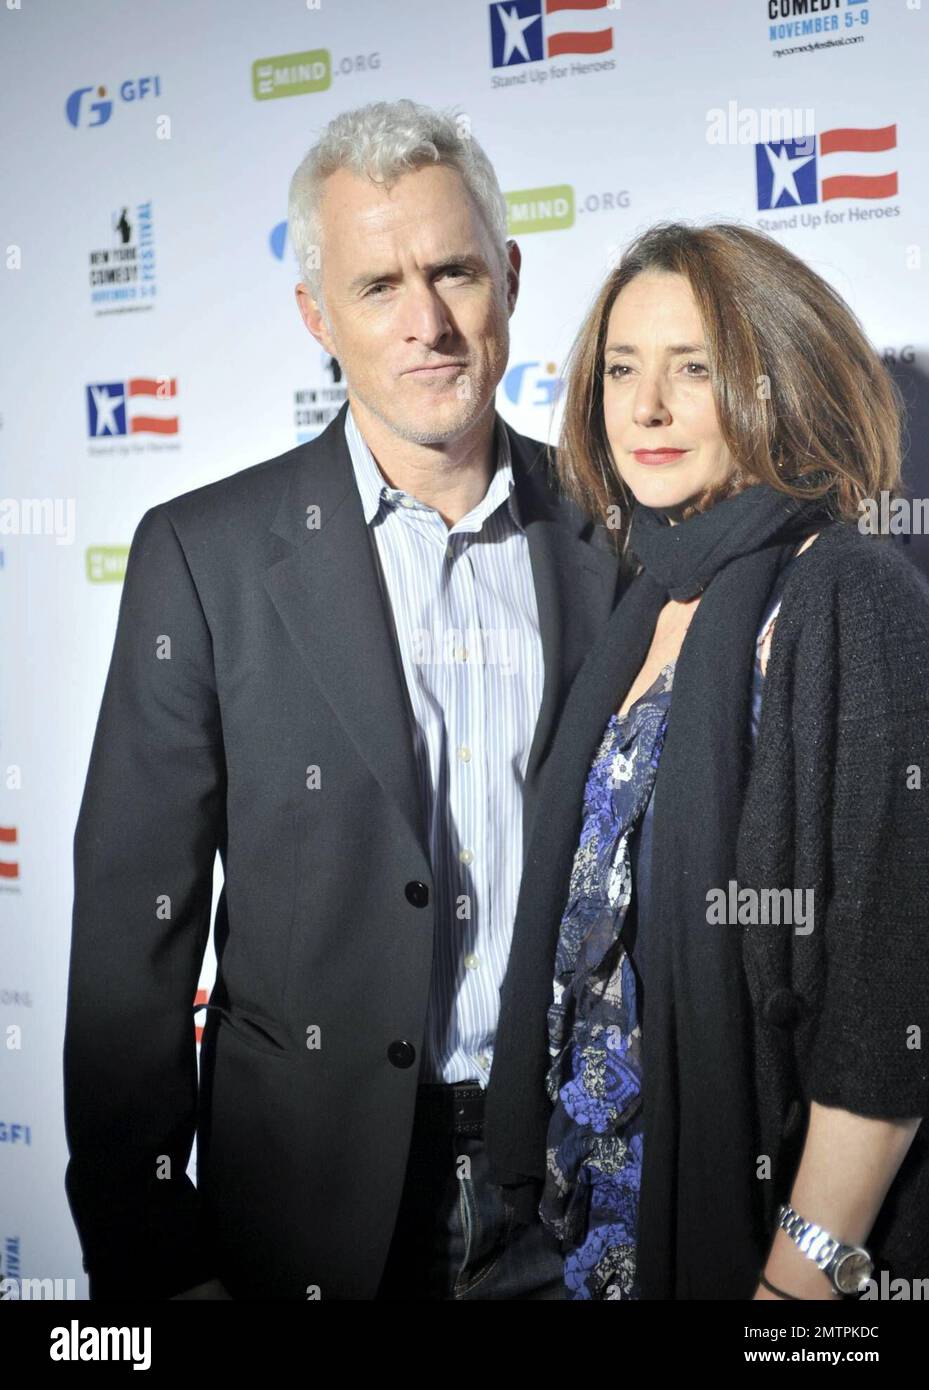 John Slattery (Mad Men) and wife Talia Balsam Attend New York Comedy Festival's Stand Up For Heroes: A Benefit for the Bob Woodruff Foundation at Town Hall. New York, NY. 11/5/08.  . Stock Photo